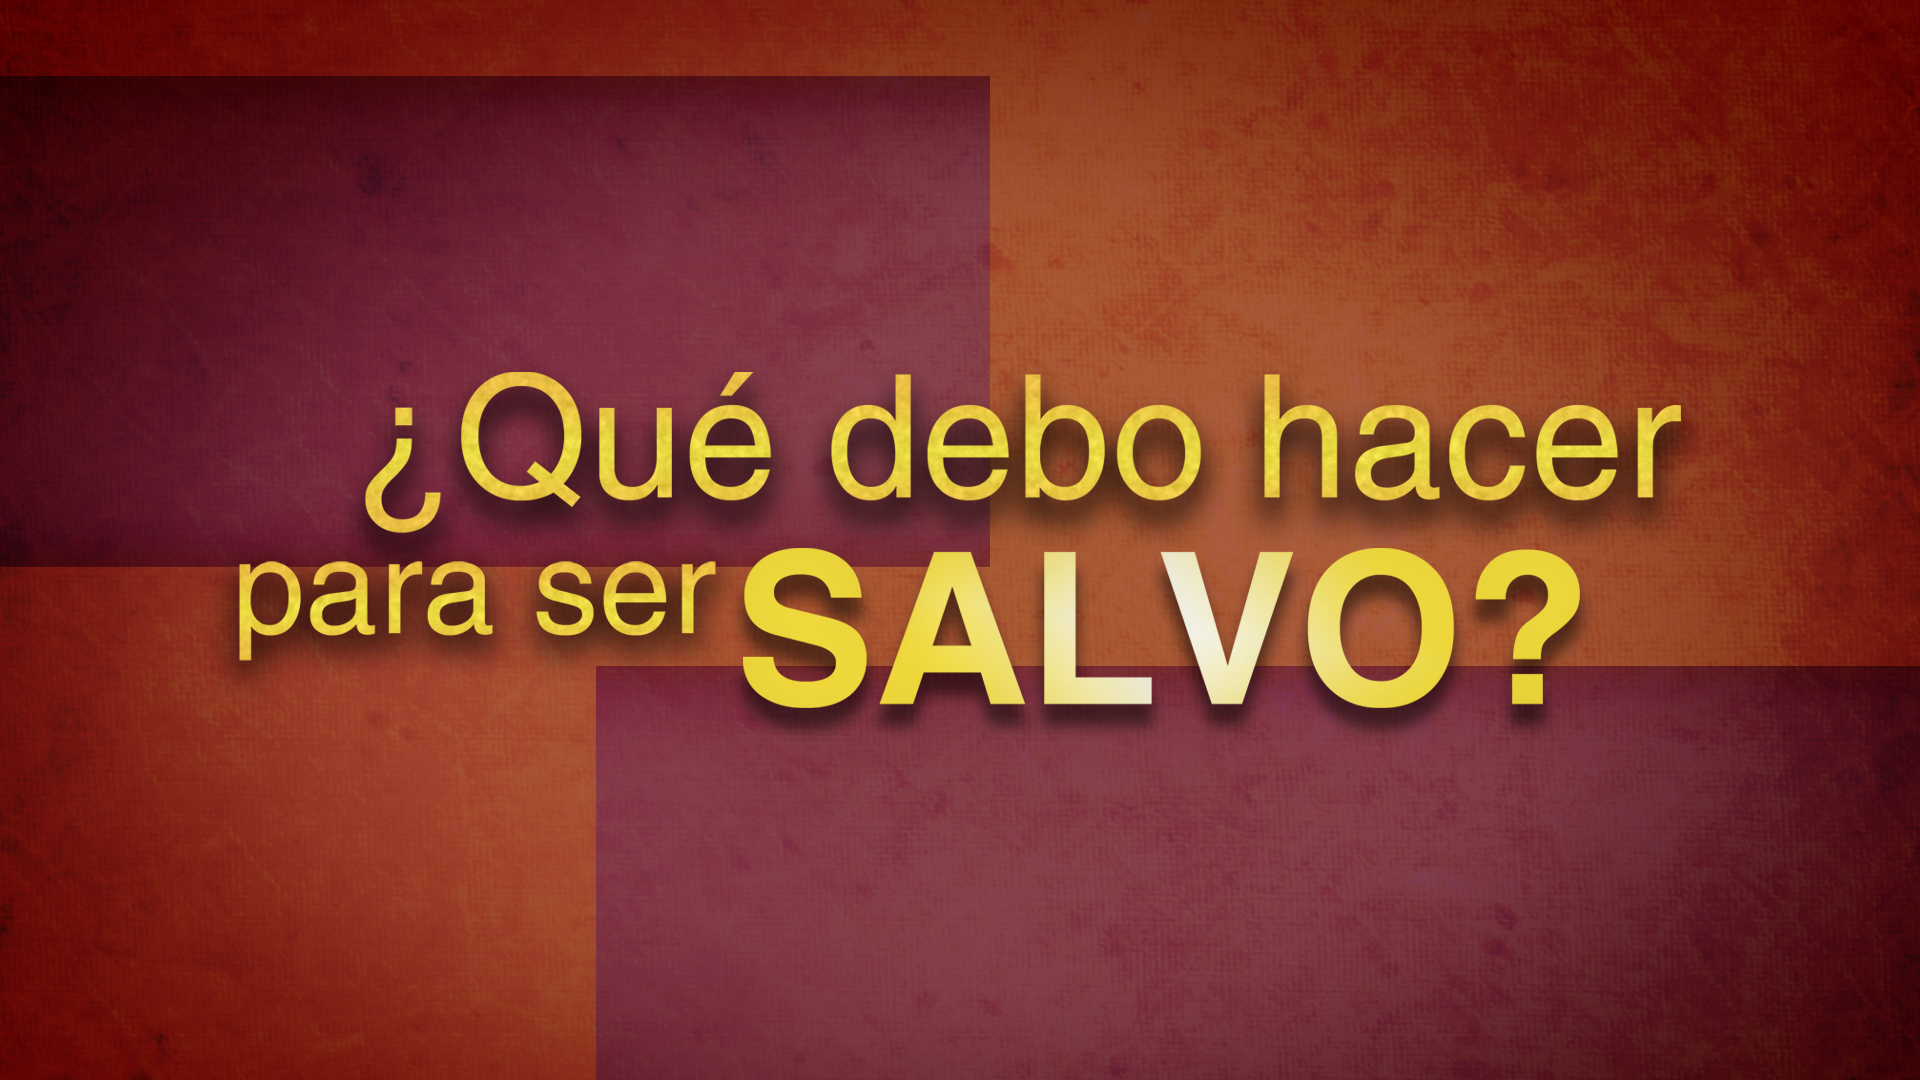 ¿Qué Debo Hacer Para Ser Salvo? (What Must I Do to Be Saved?) - Spanish Version